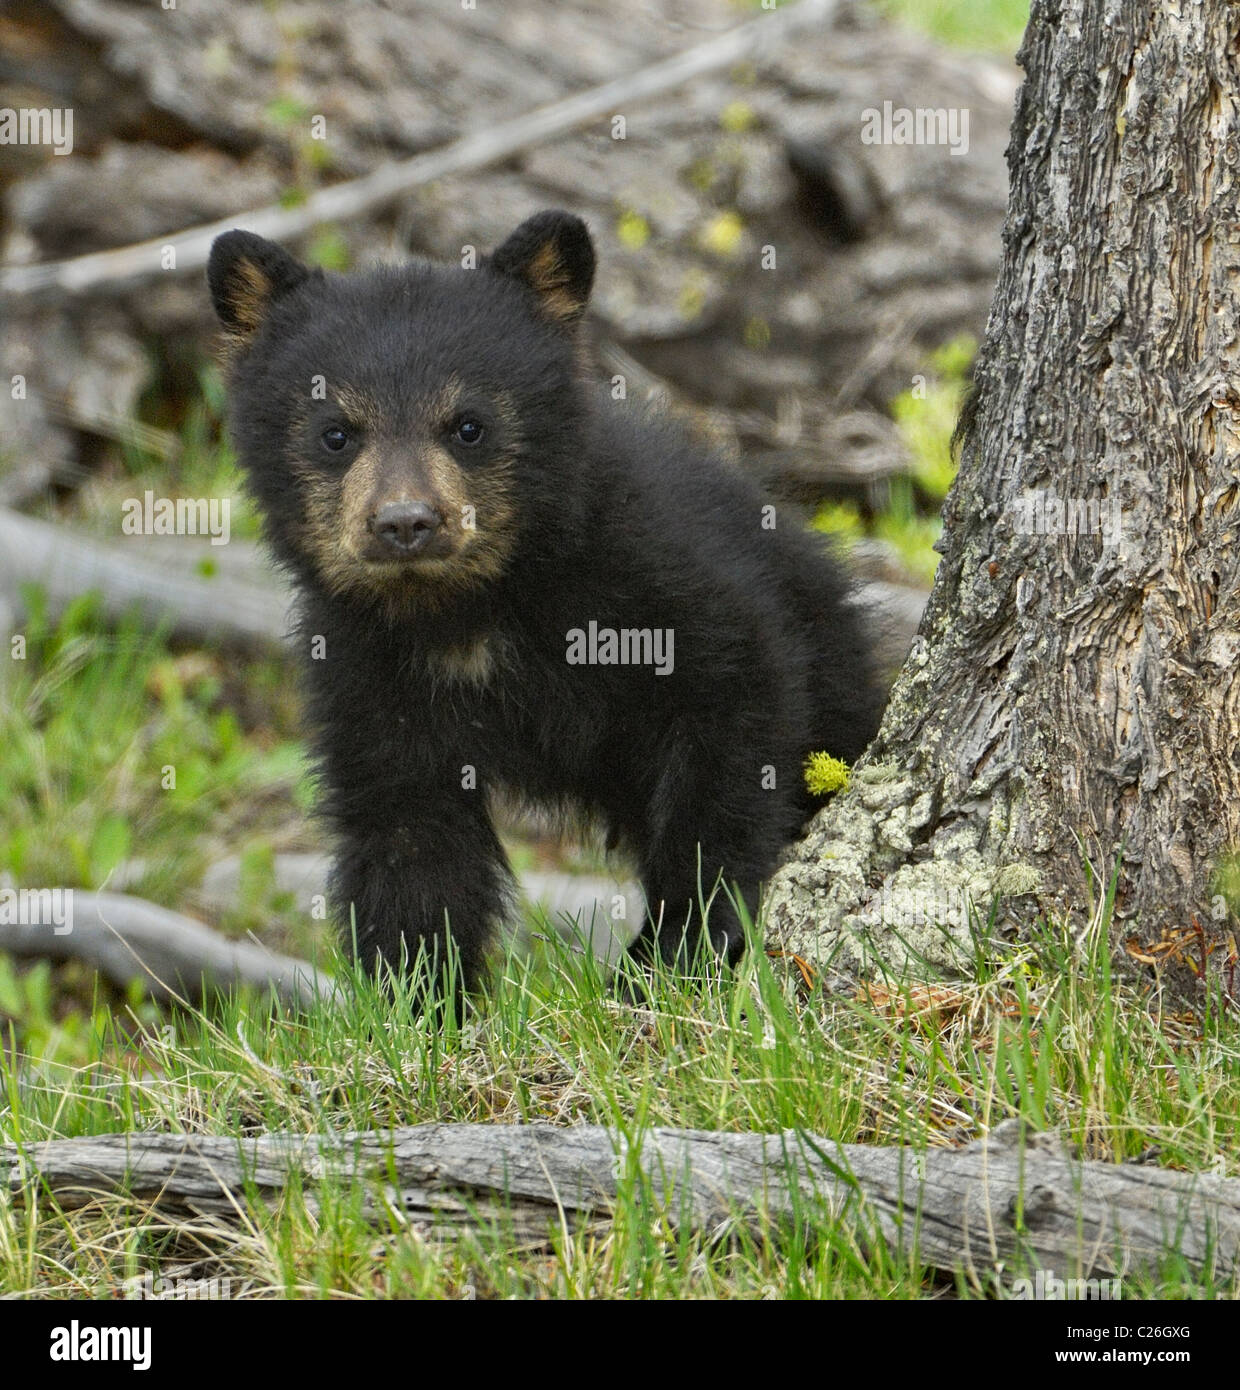 Baby black bear posing Banque D'Images